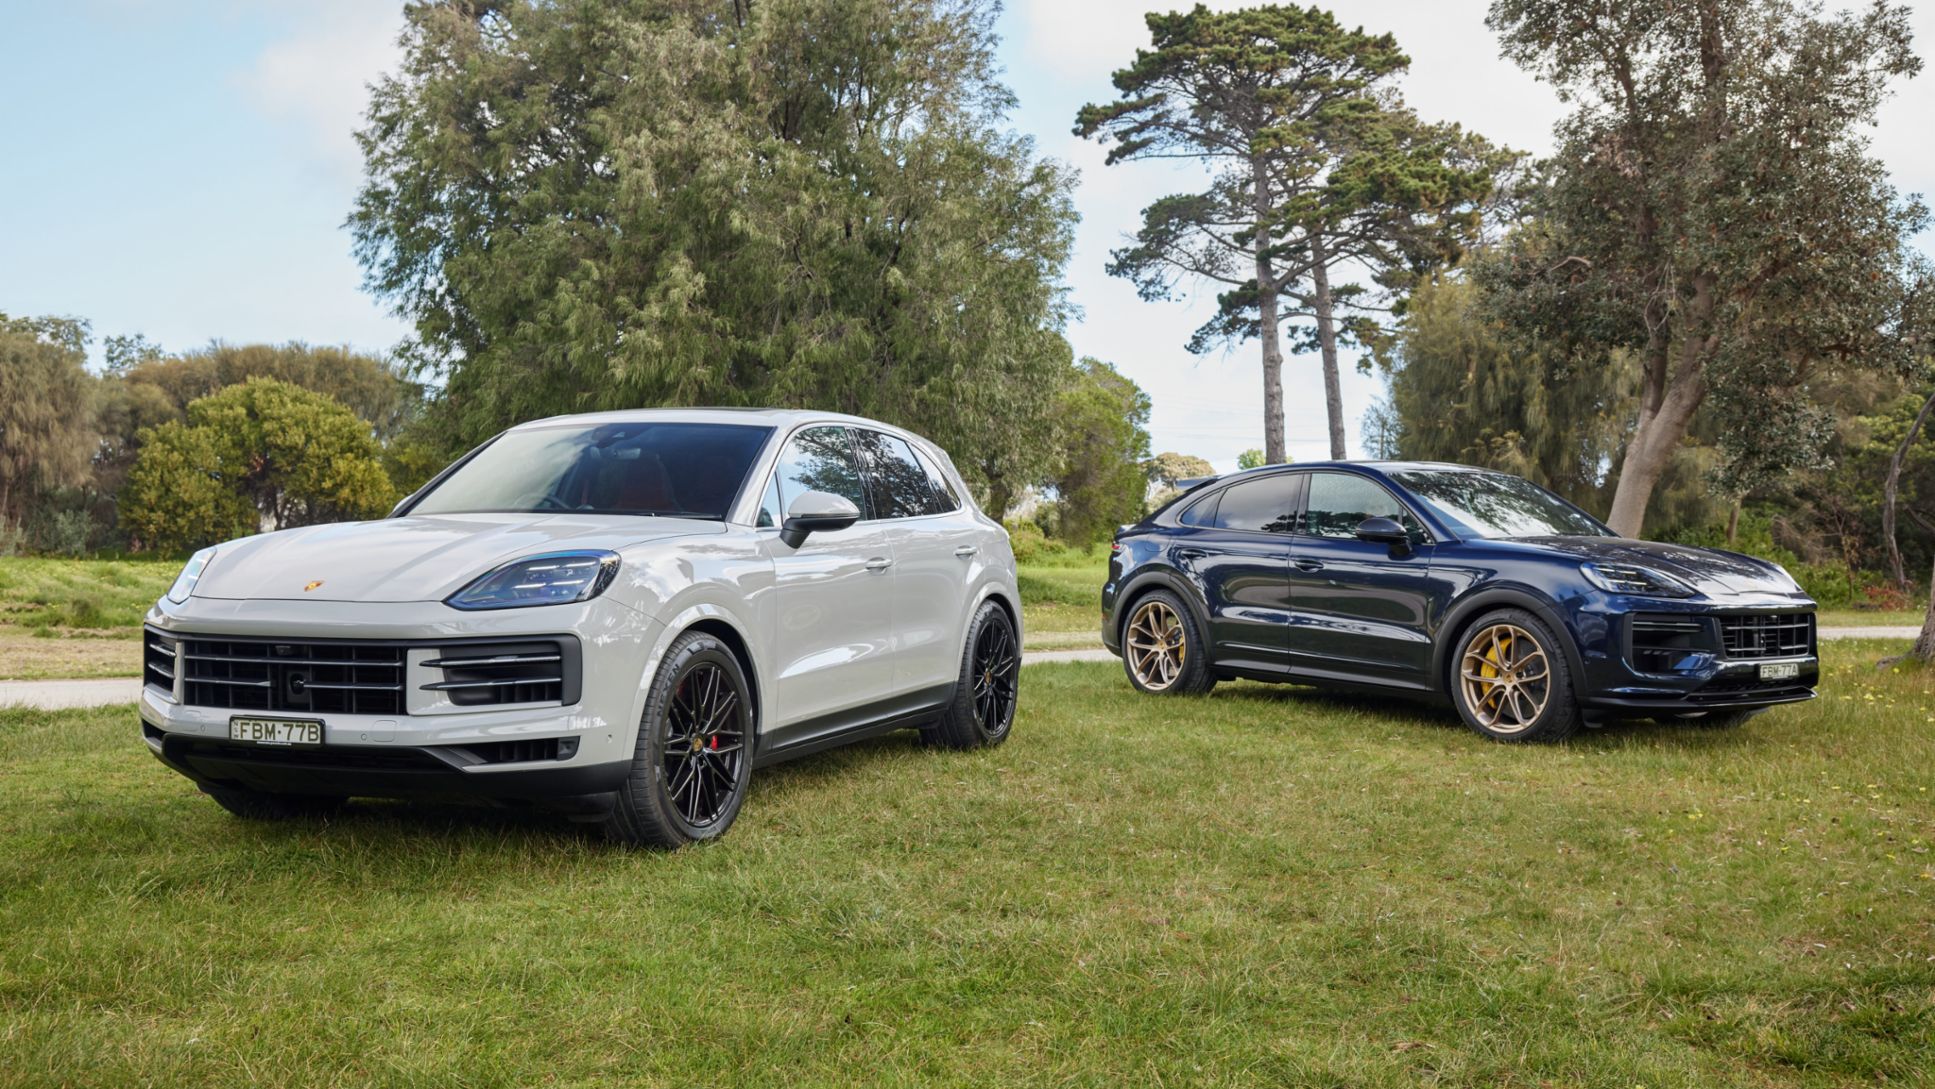 Product Highlights: Porsche Cayenne – More luxury, more